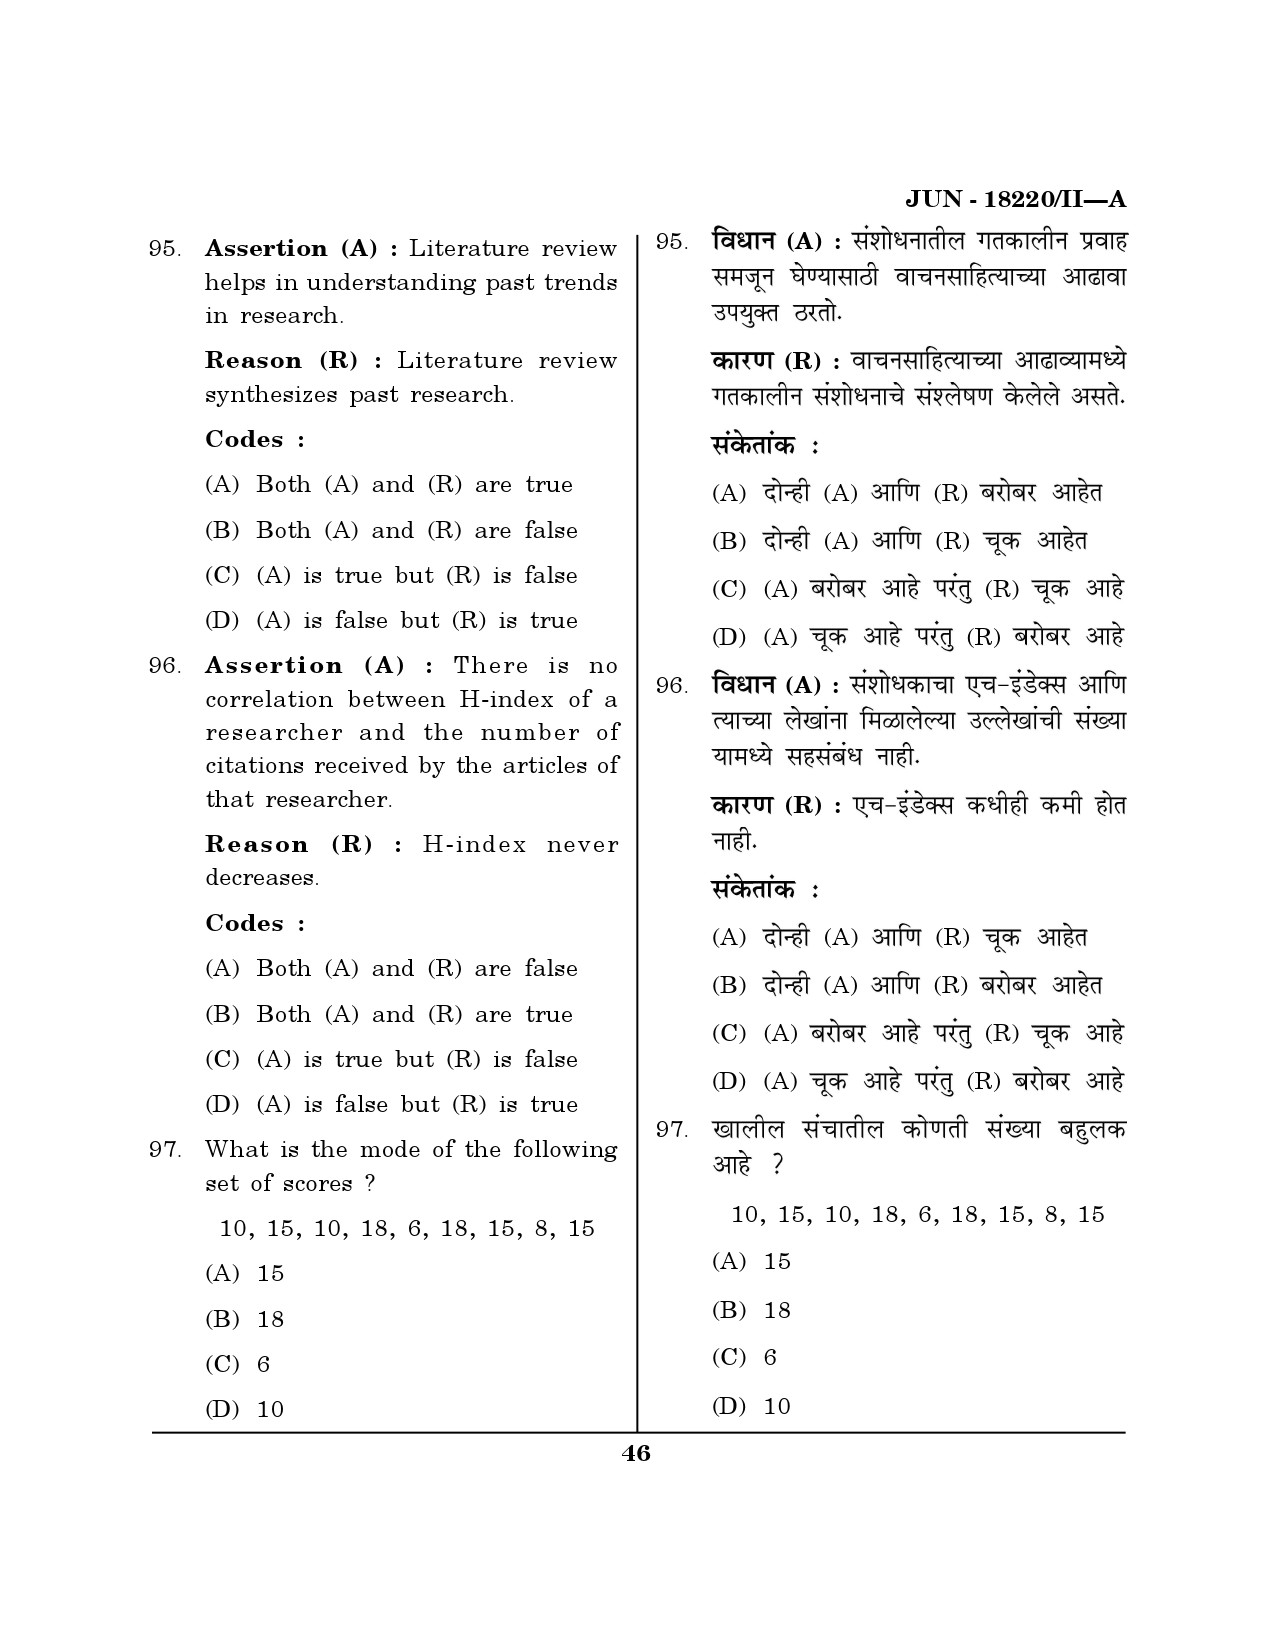 Maharashtra SET Library Information Science Question Paper II June 2020 45